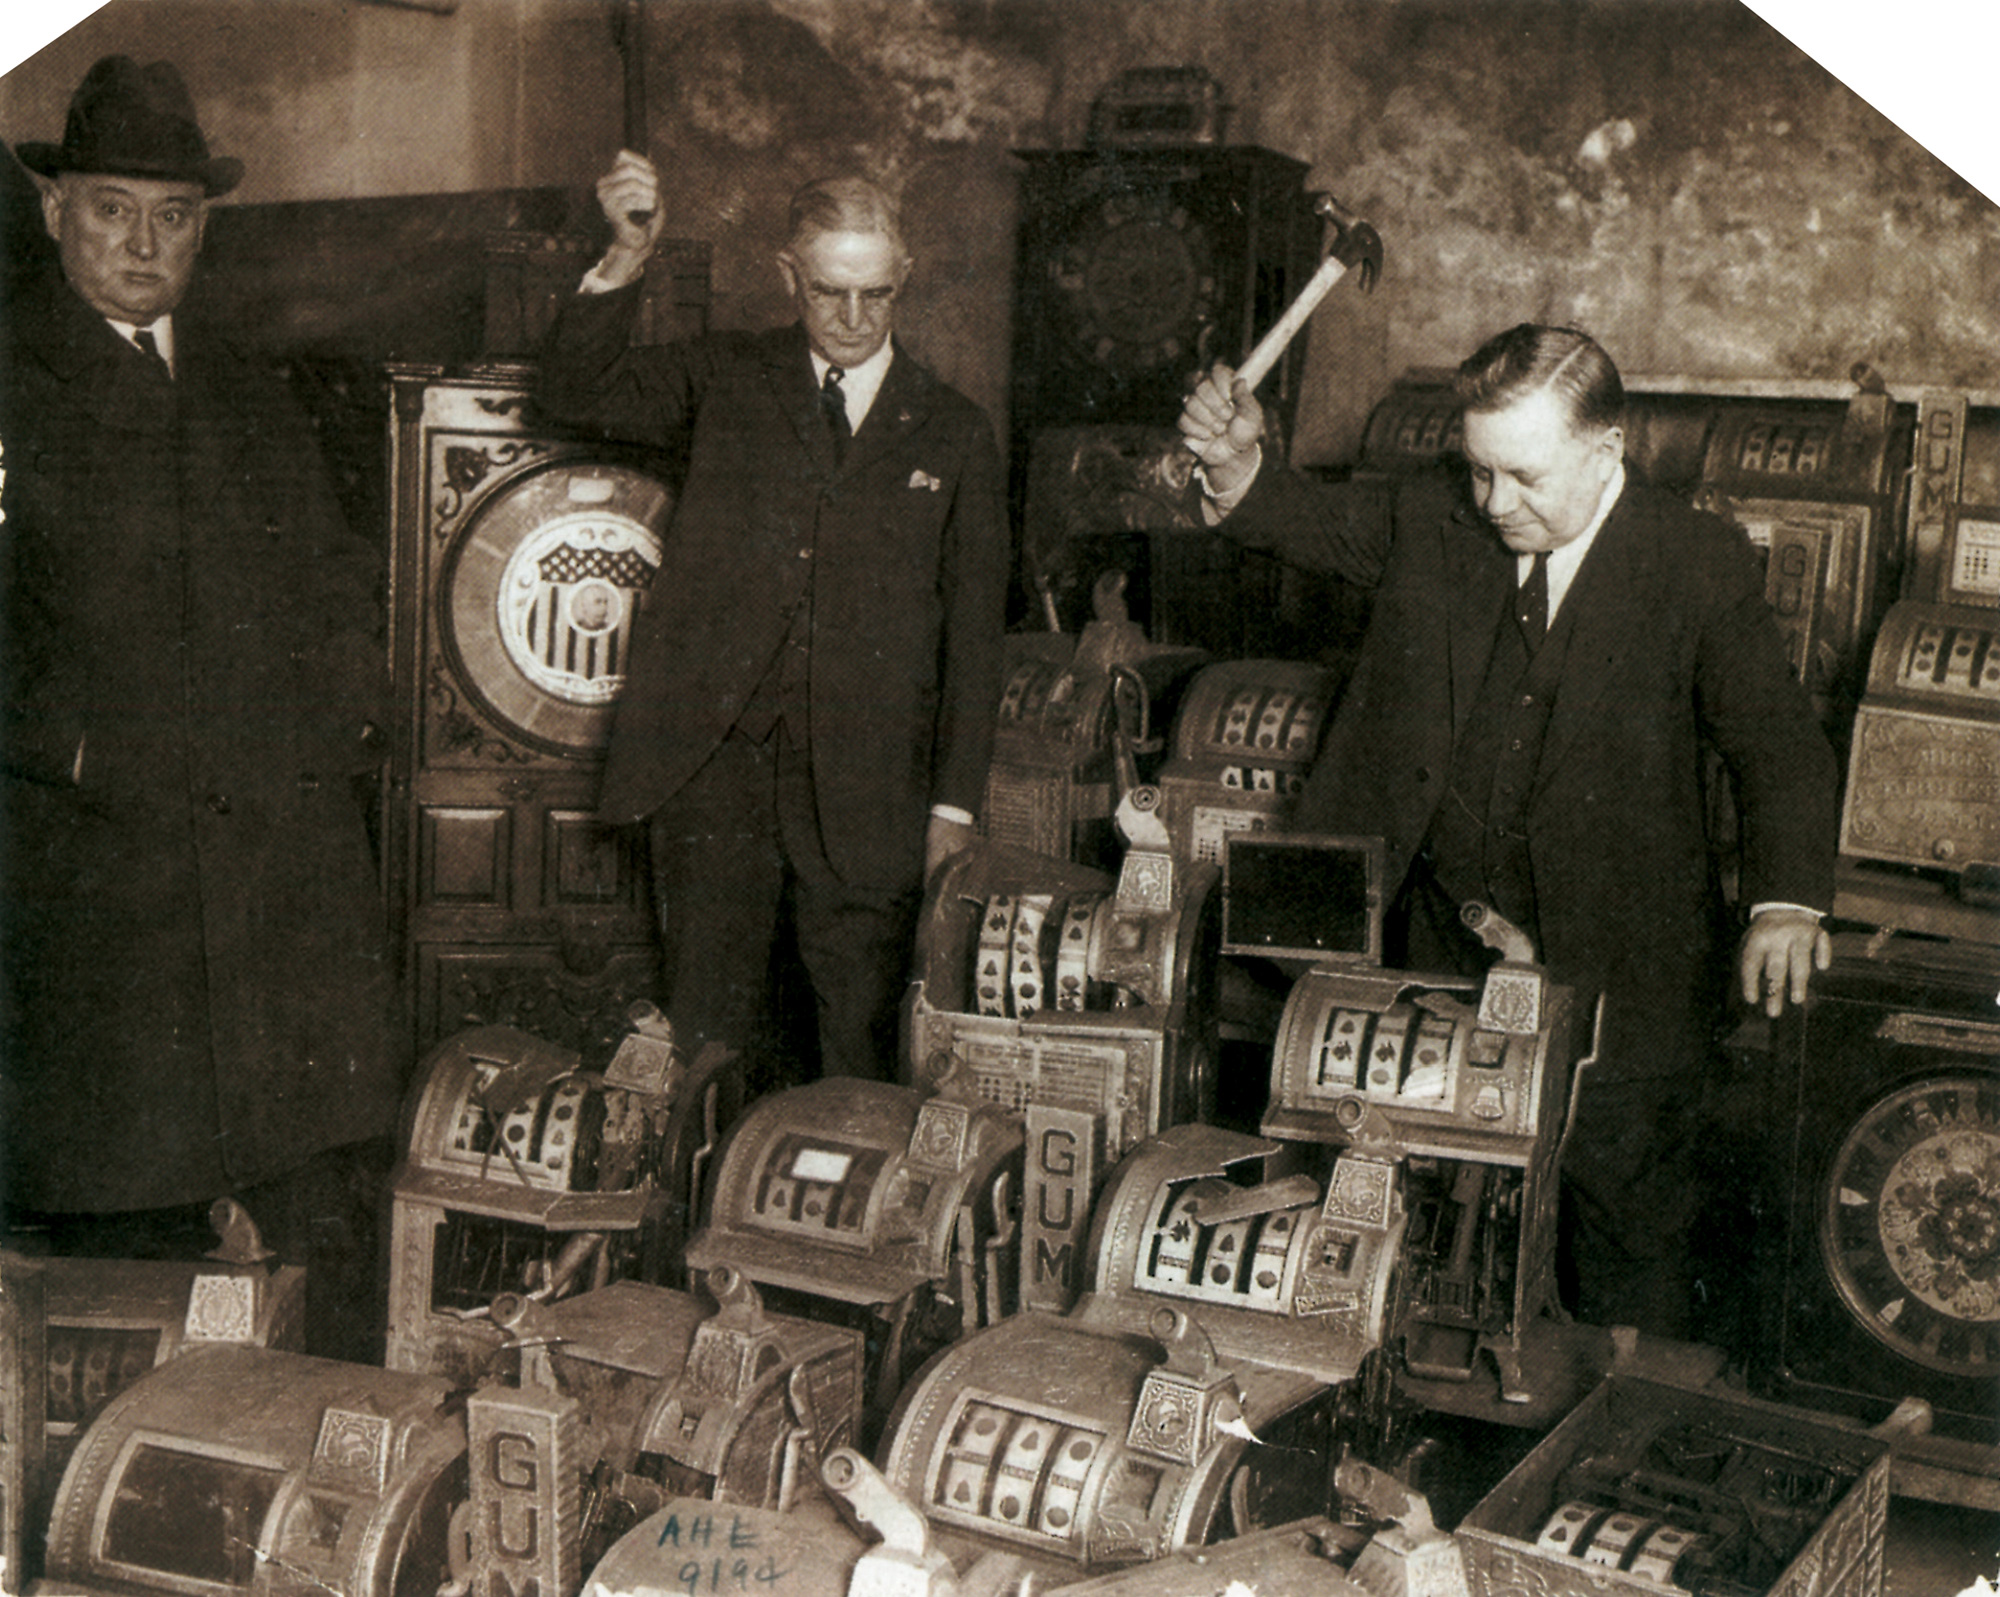 A circa 1930s photograph of illegal slot machines being destroyed by Chicago law enforcement.